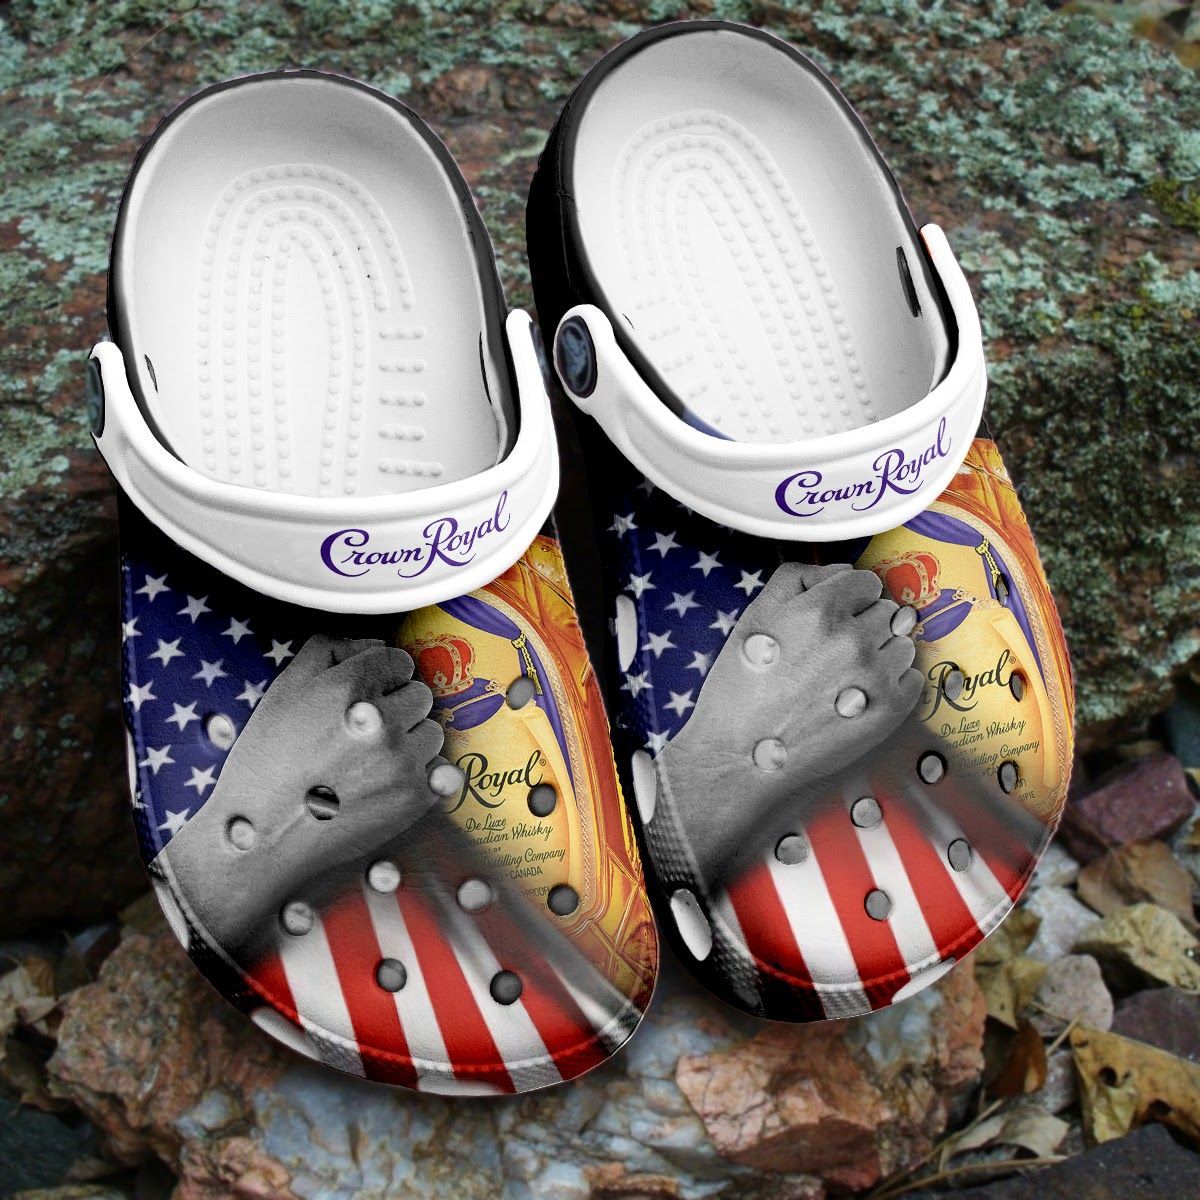 If you'd like to purchase a pair of Crocband Clogs, be sure to check out the official website. 142